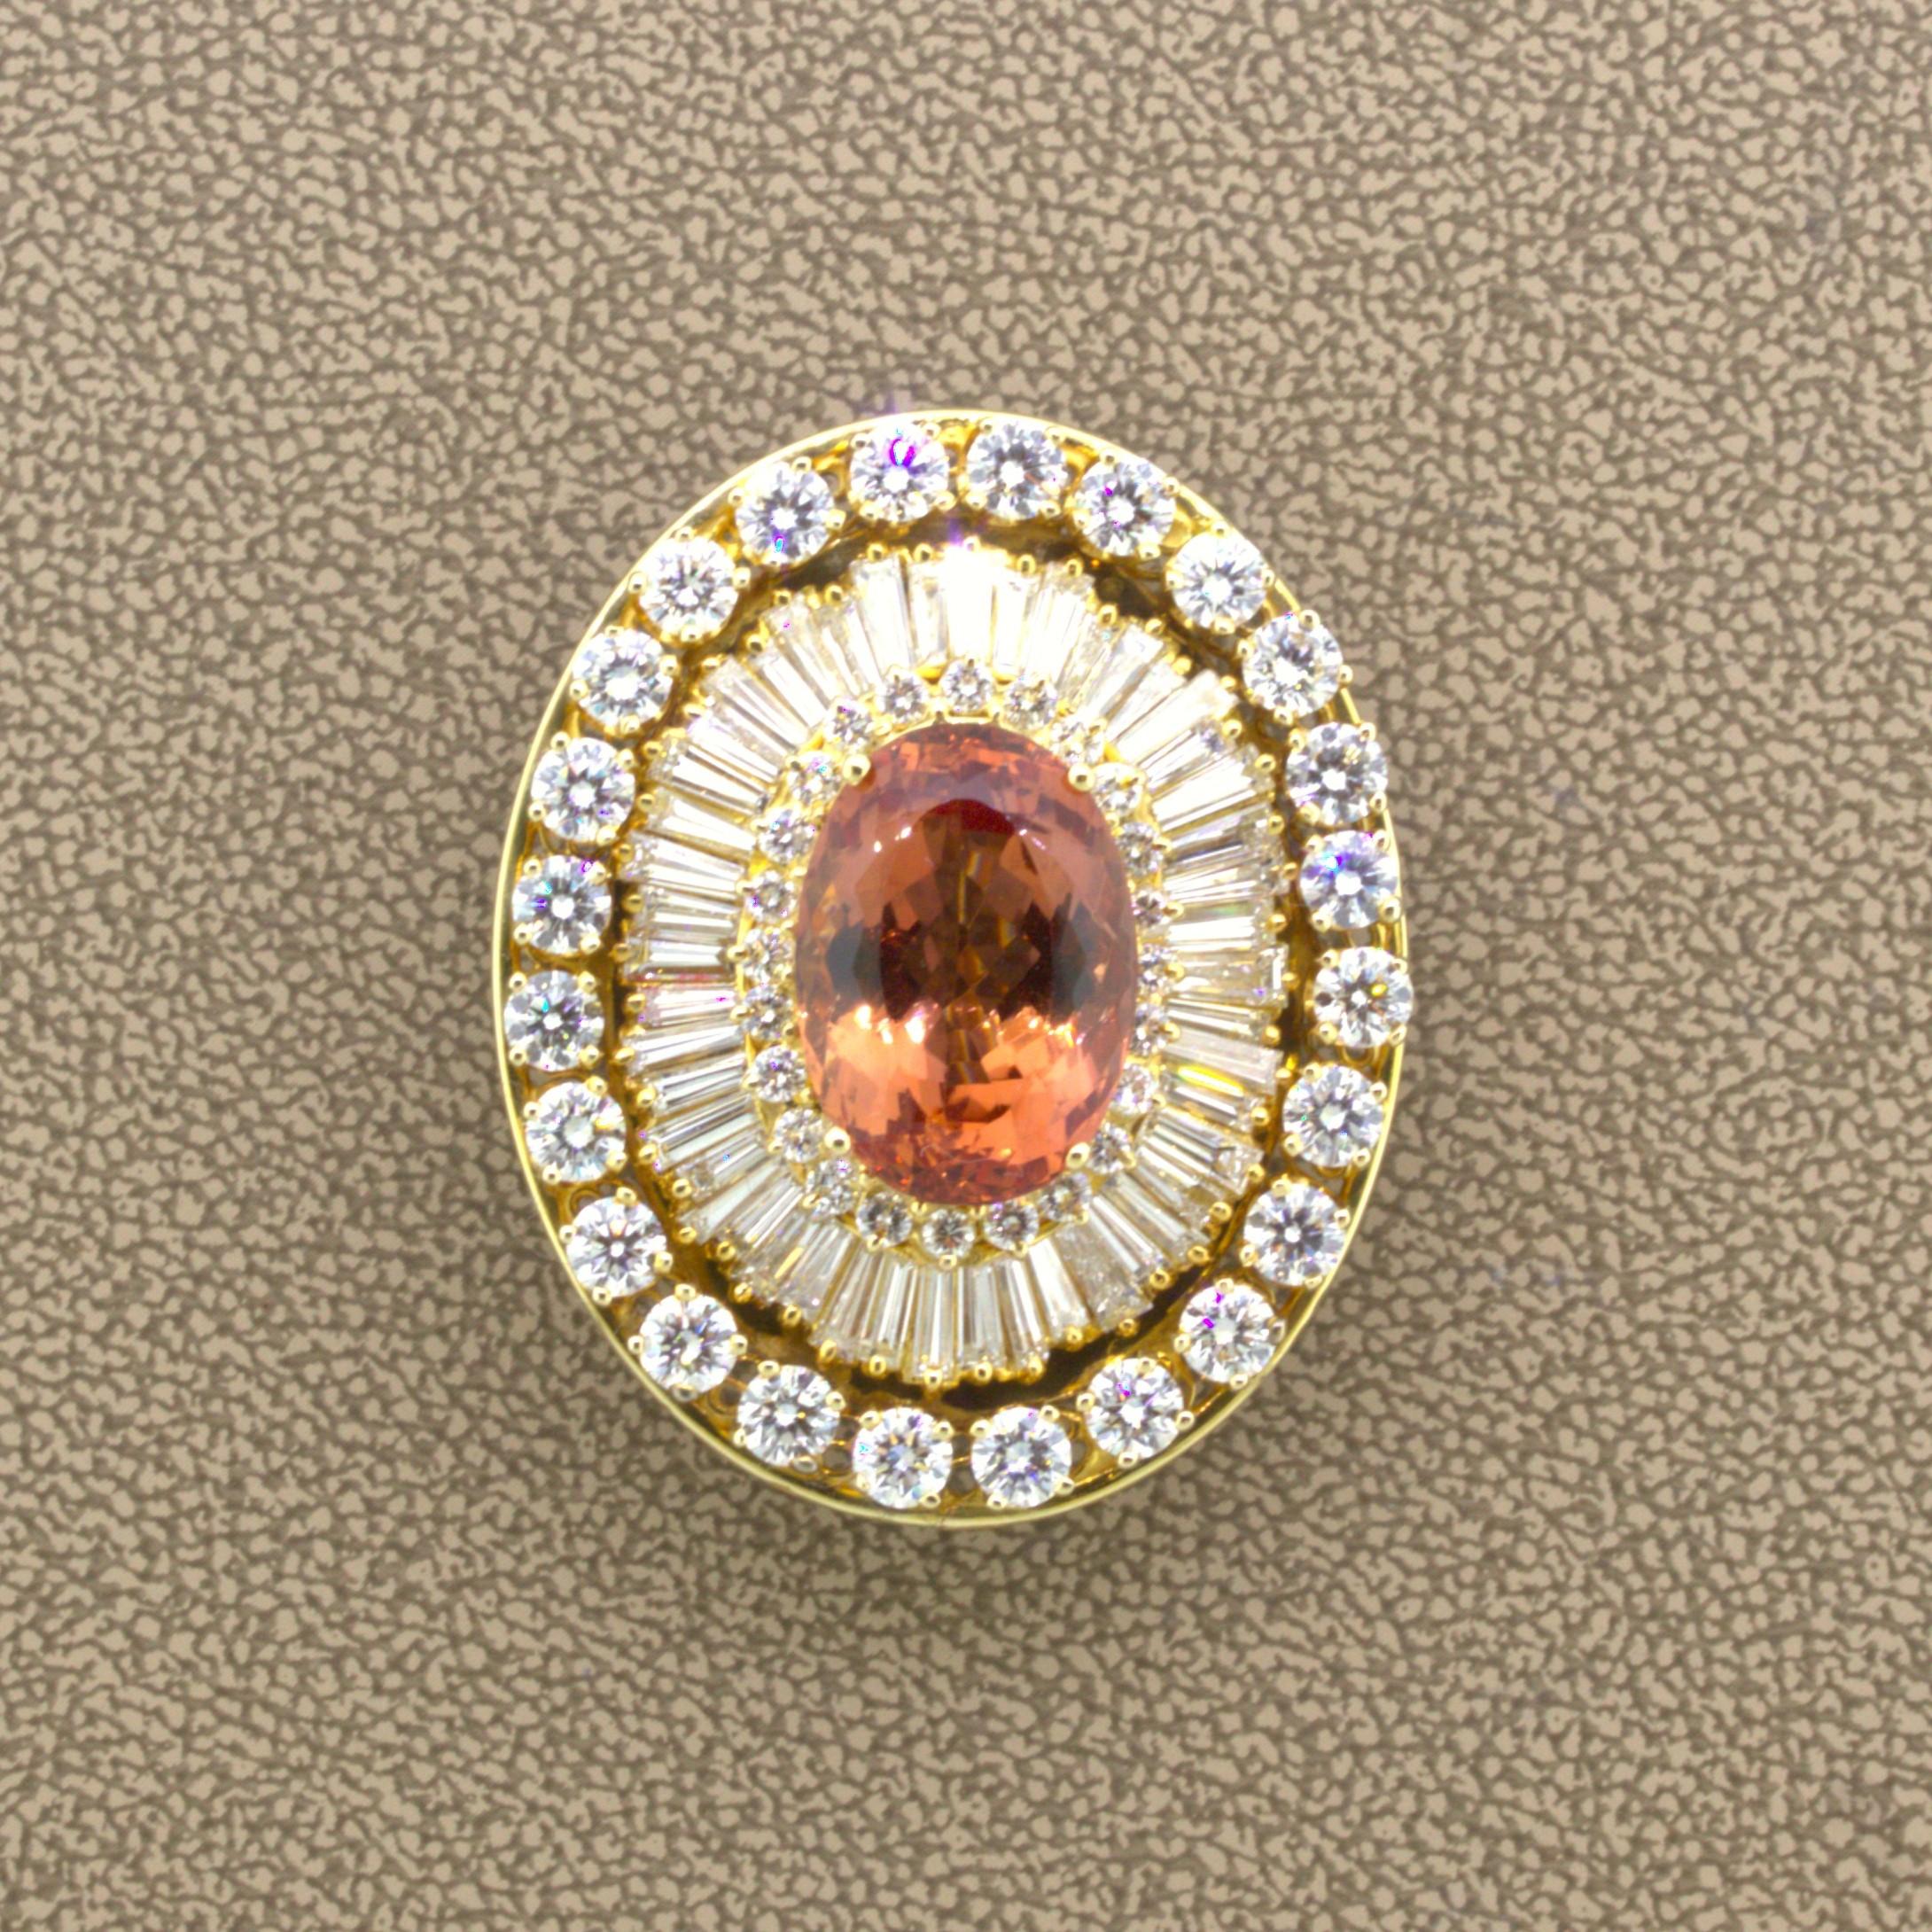 Simply stunning. A beautiful imperial topaz brooch featuring a top gem quality topaz weighing an impressive 13.27 carats. The brooch is so special that it was featured in the GIA’s quarterly magazine, “Gems and Gemology” due to its high quality and